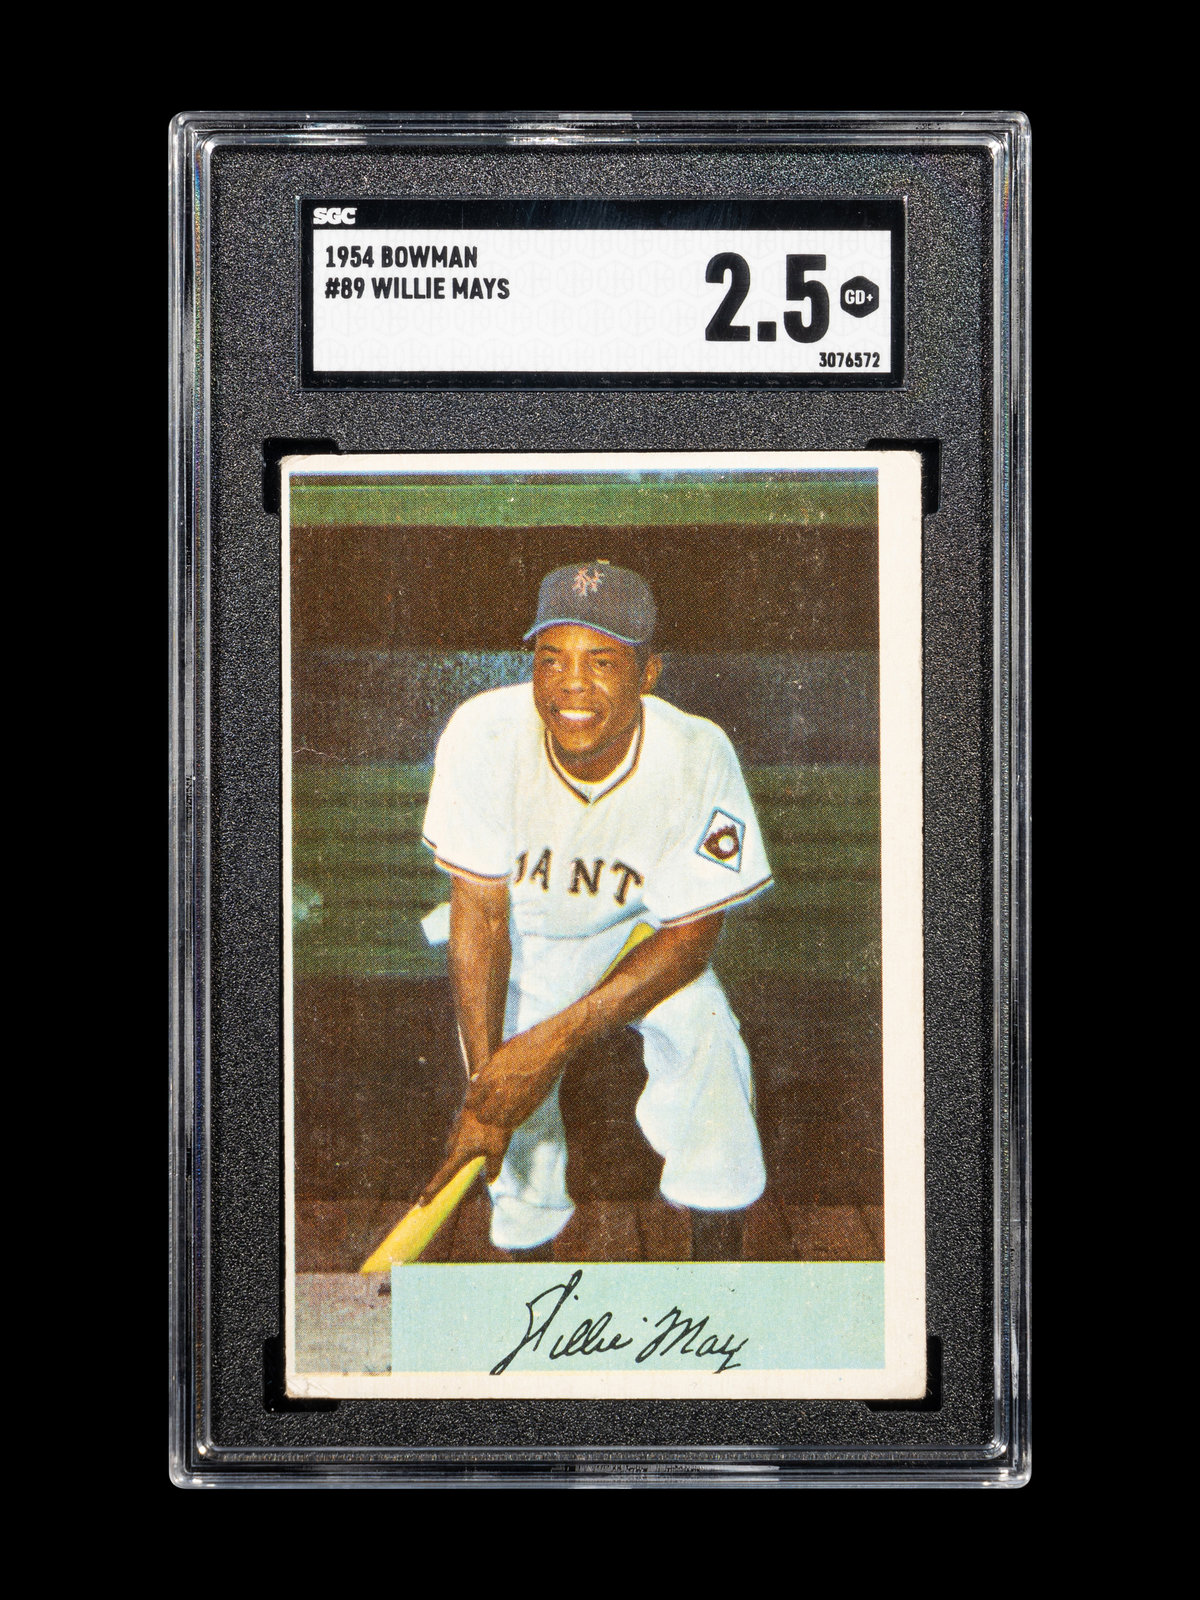 Original artwork for Willie Mays baseball card up for auction